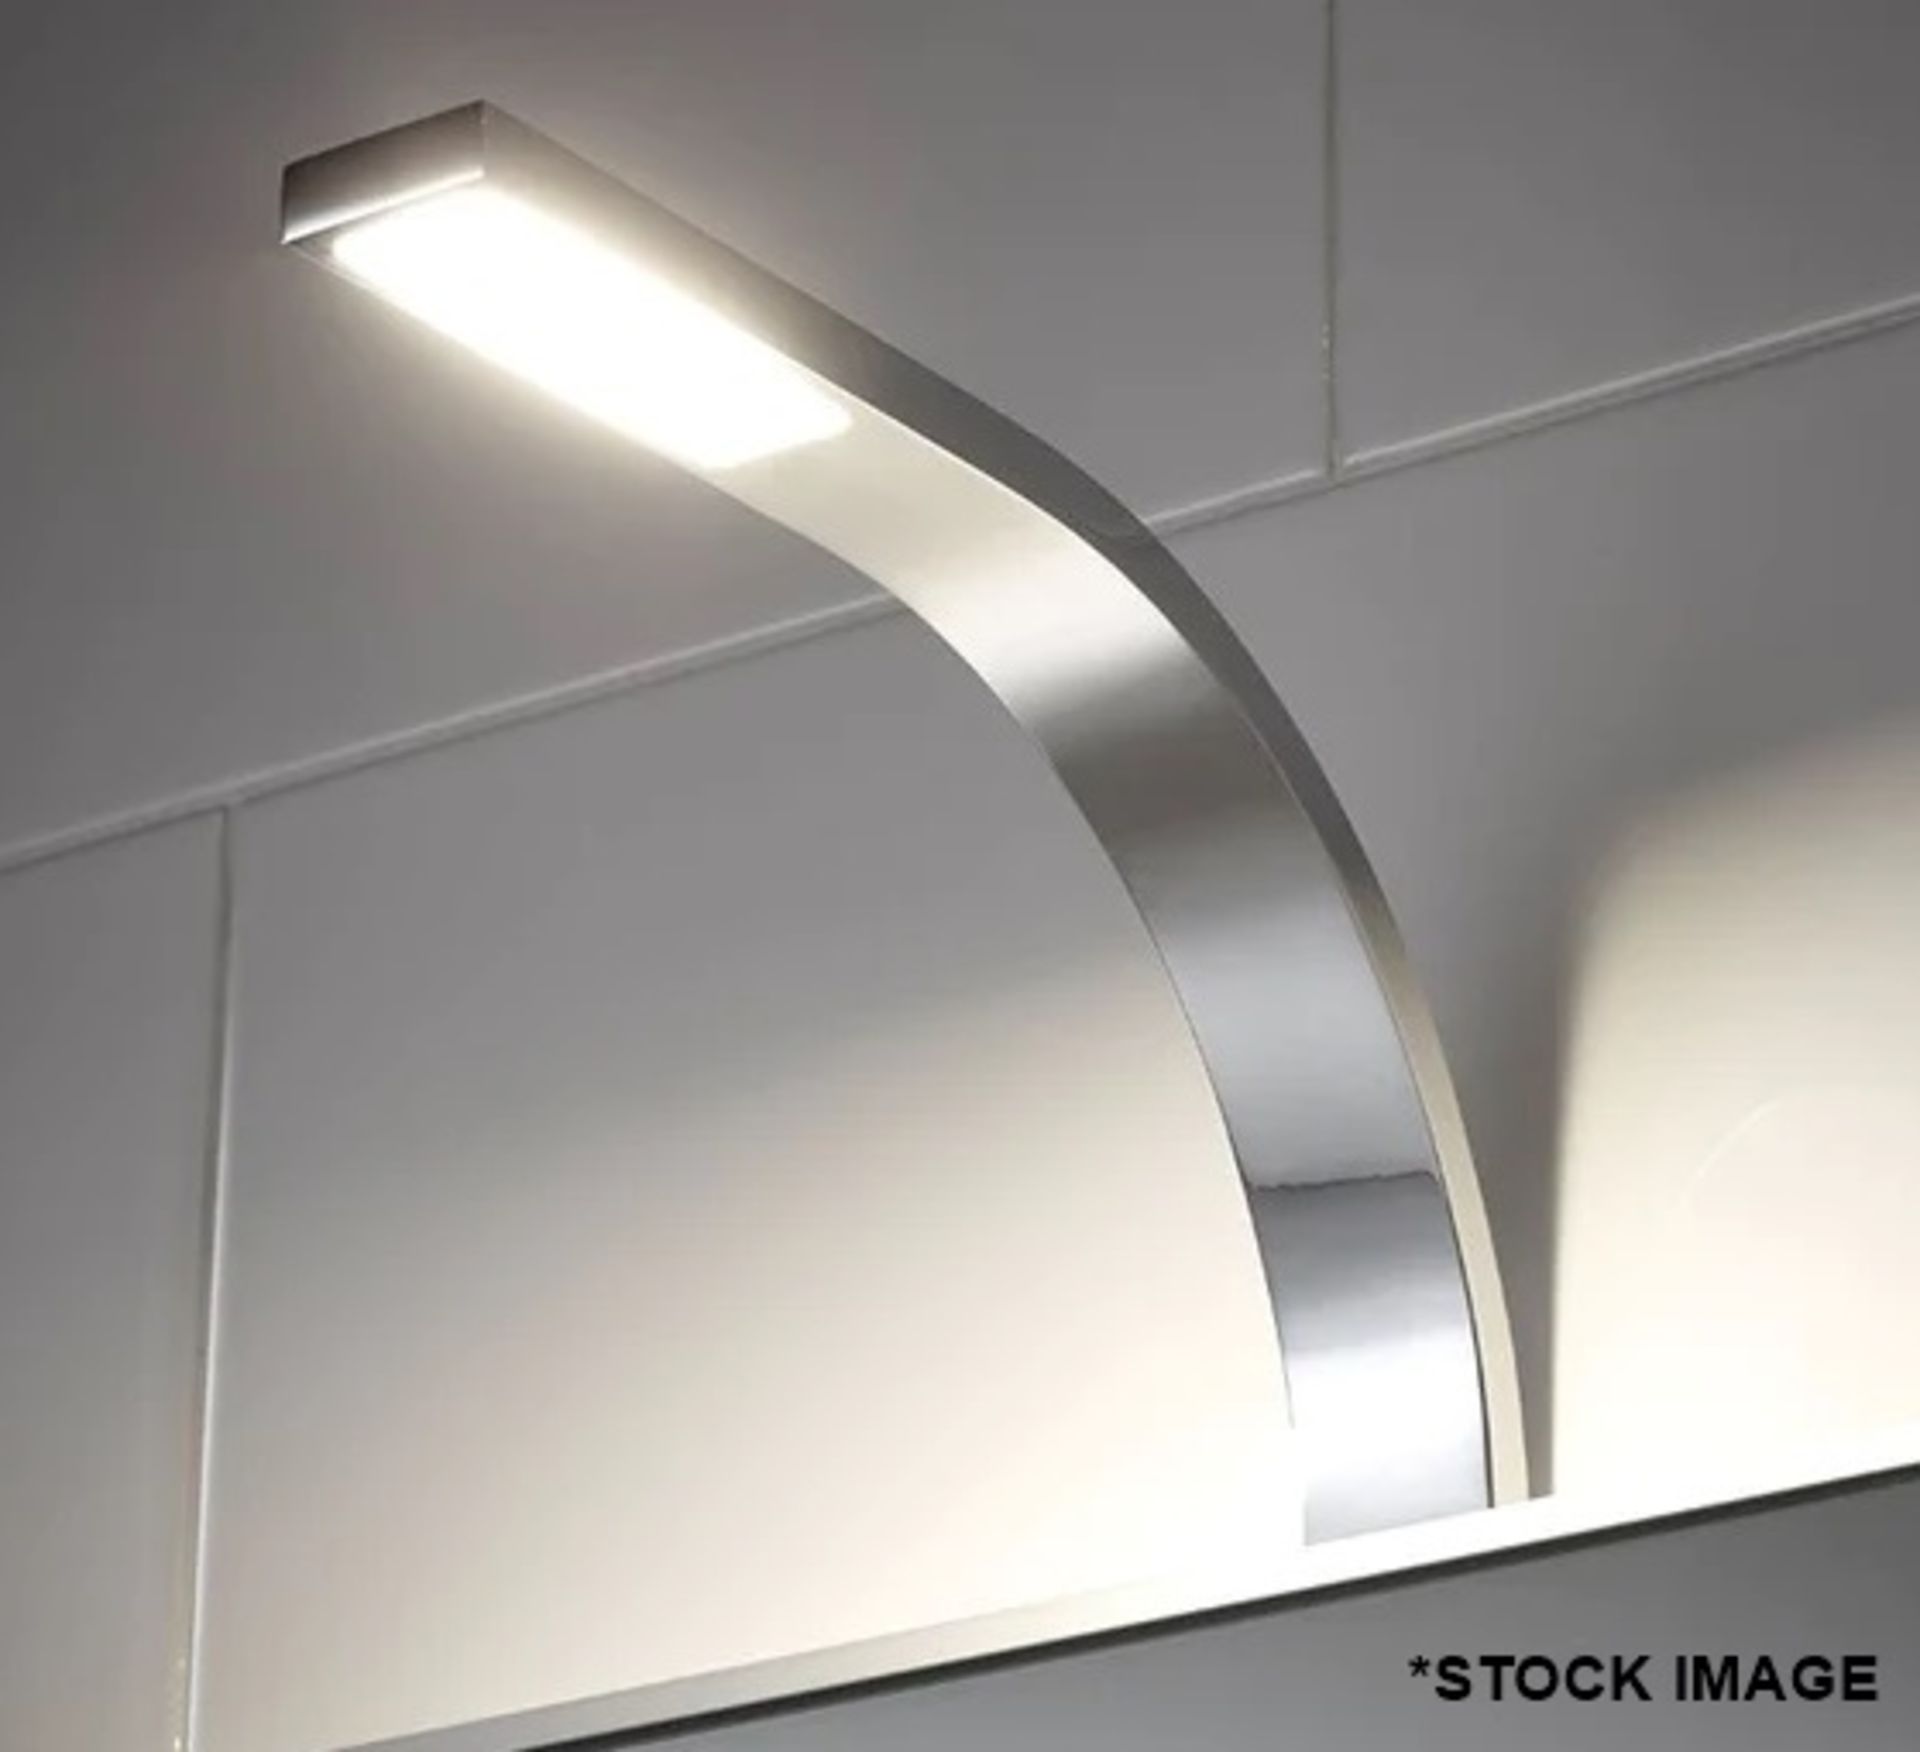 1 x SENSIO Hydra Sleek COB LED Technology Over Cabinet/Mirror Light With Acrylic Cover 165mm